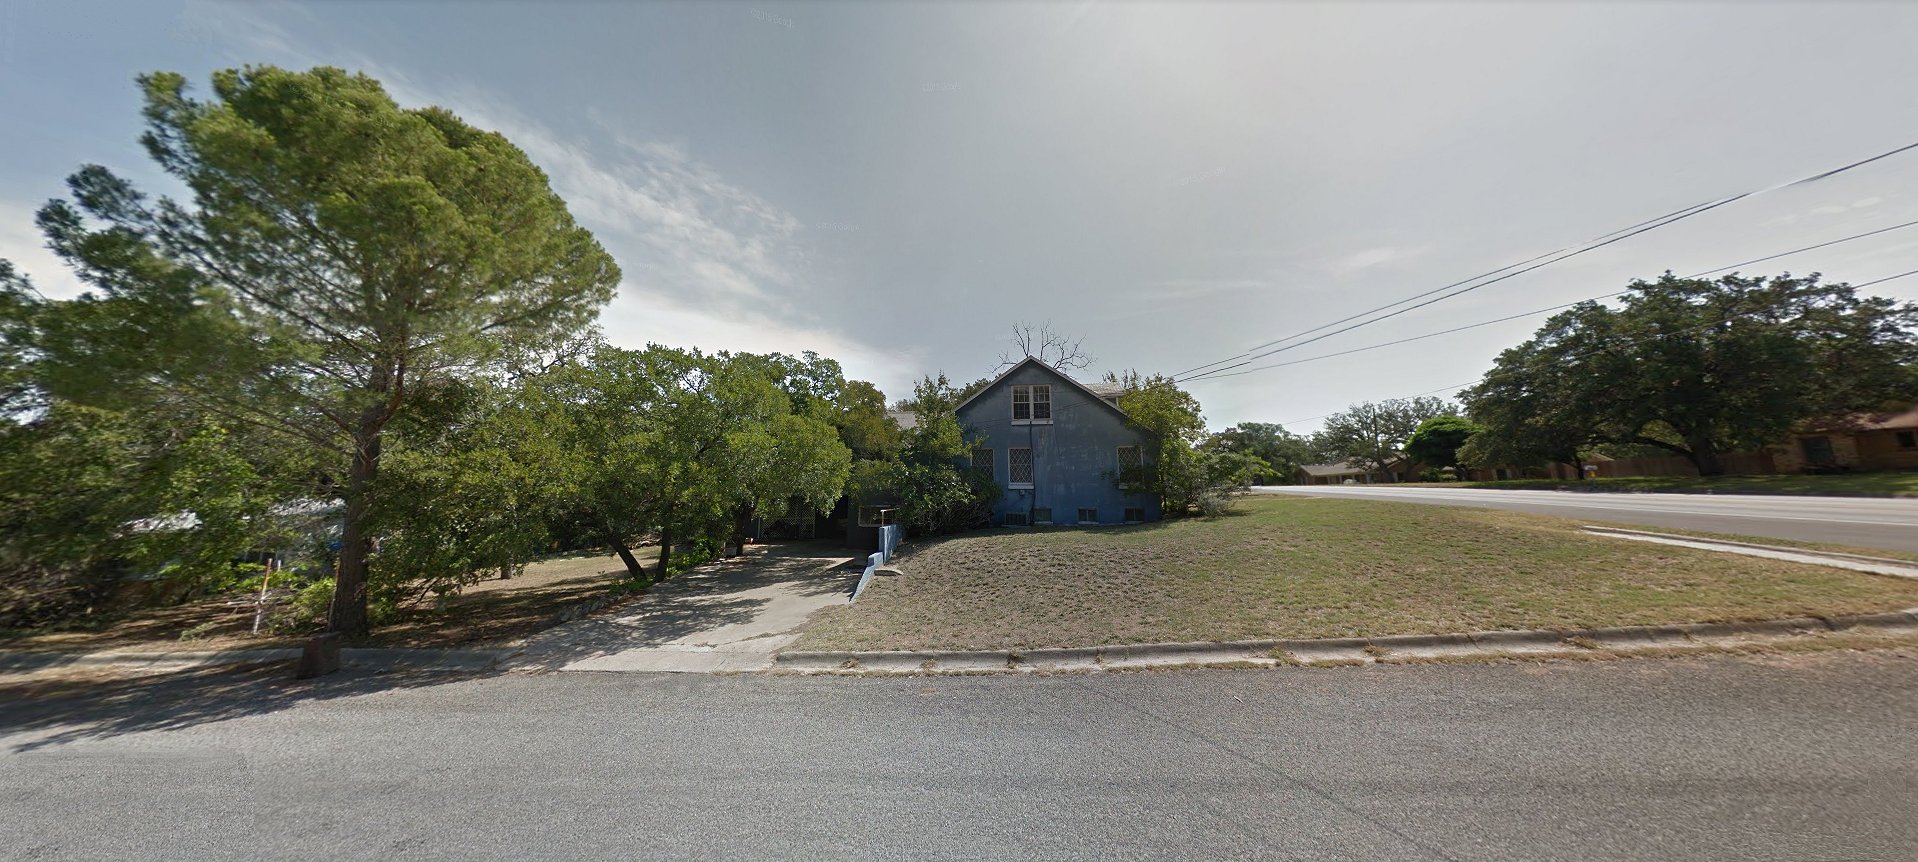 Lampasas Texas Homes For Sale, Lampasas real estate, Hill Country Homes, Cheap Houses Texas Hill Country